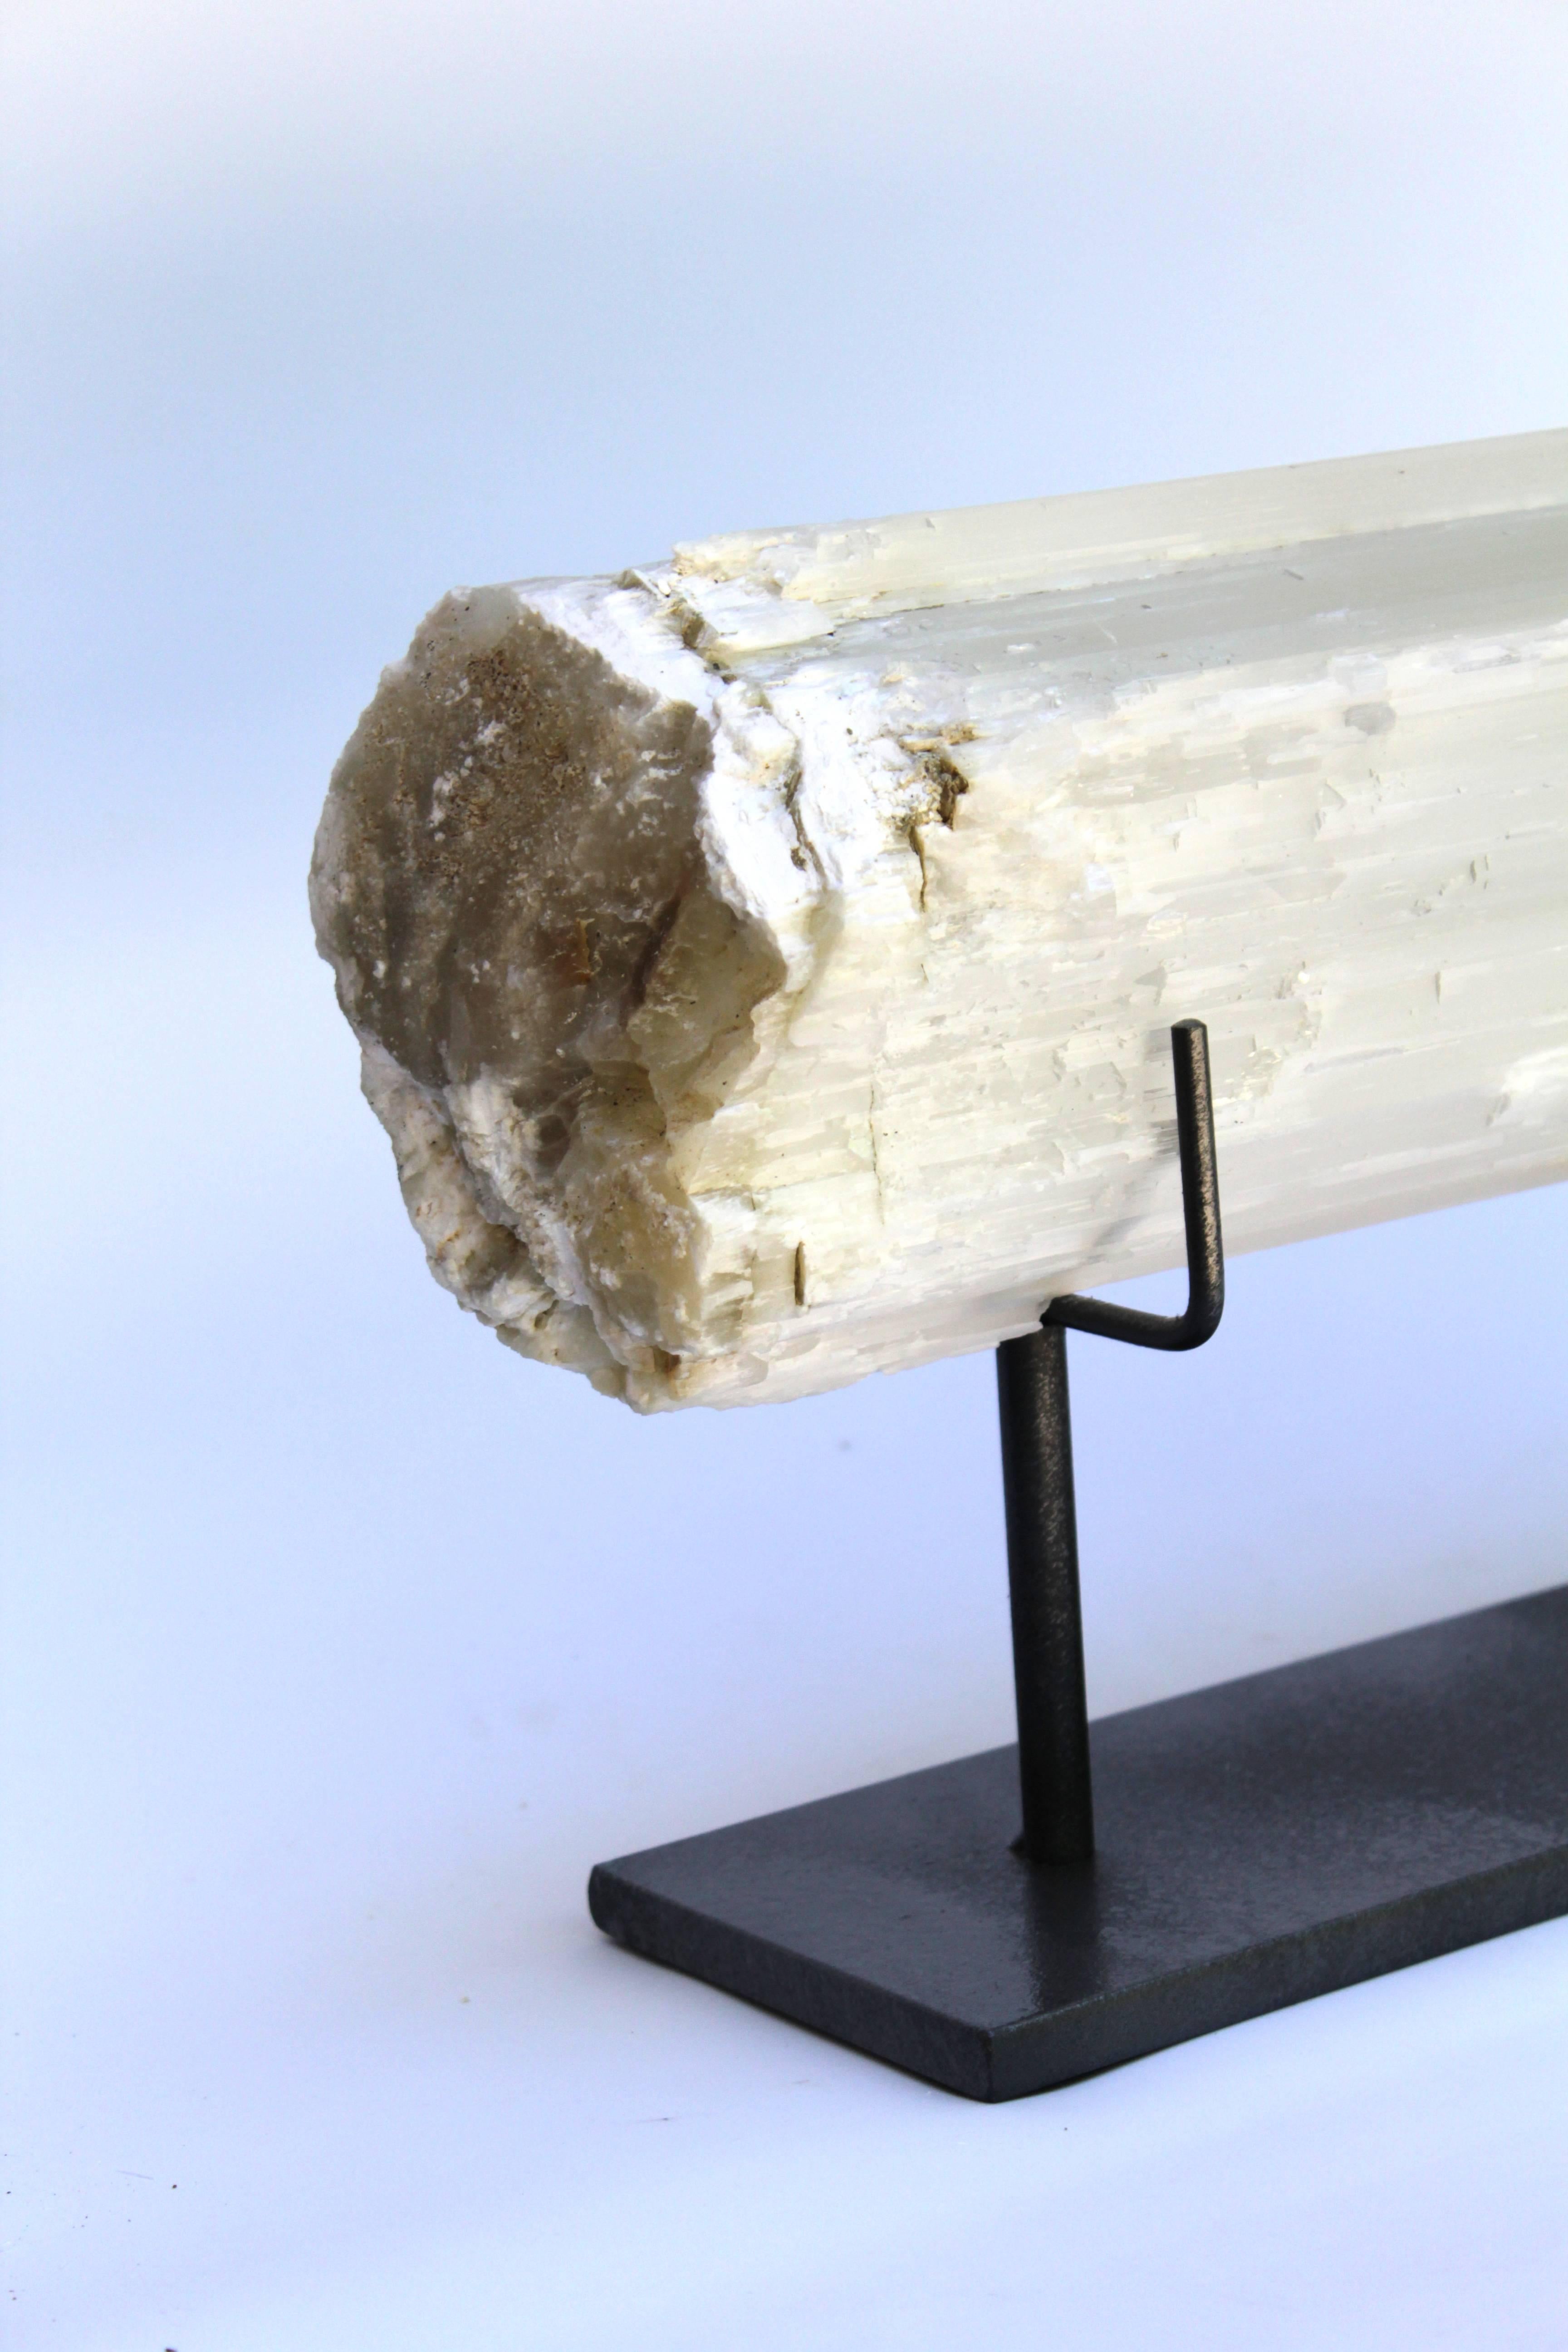 A selenite log is a single, prismatic crystal from Morocco that was formed in extensive beds by the evaporation of ocean brine. This mineral is characterized by a silky, pearly luster called satin spare.
Measures: Size: 19” long x 6” tall x 5”